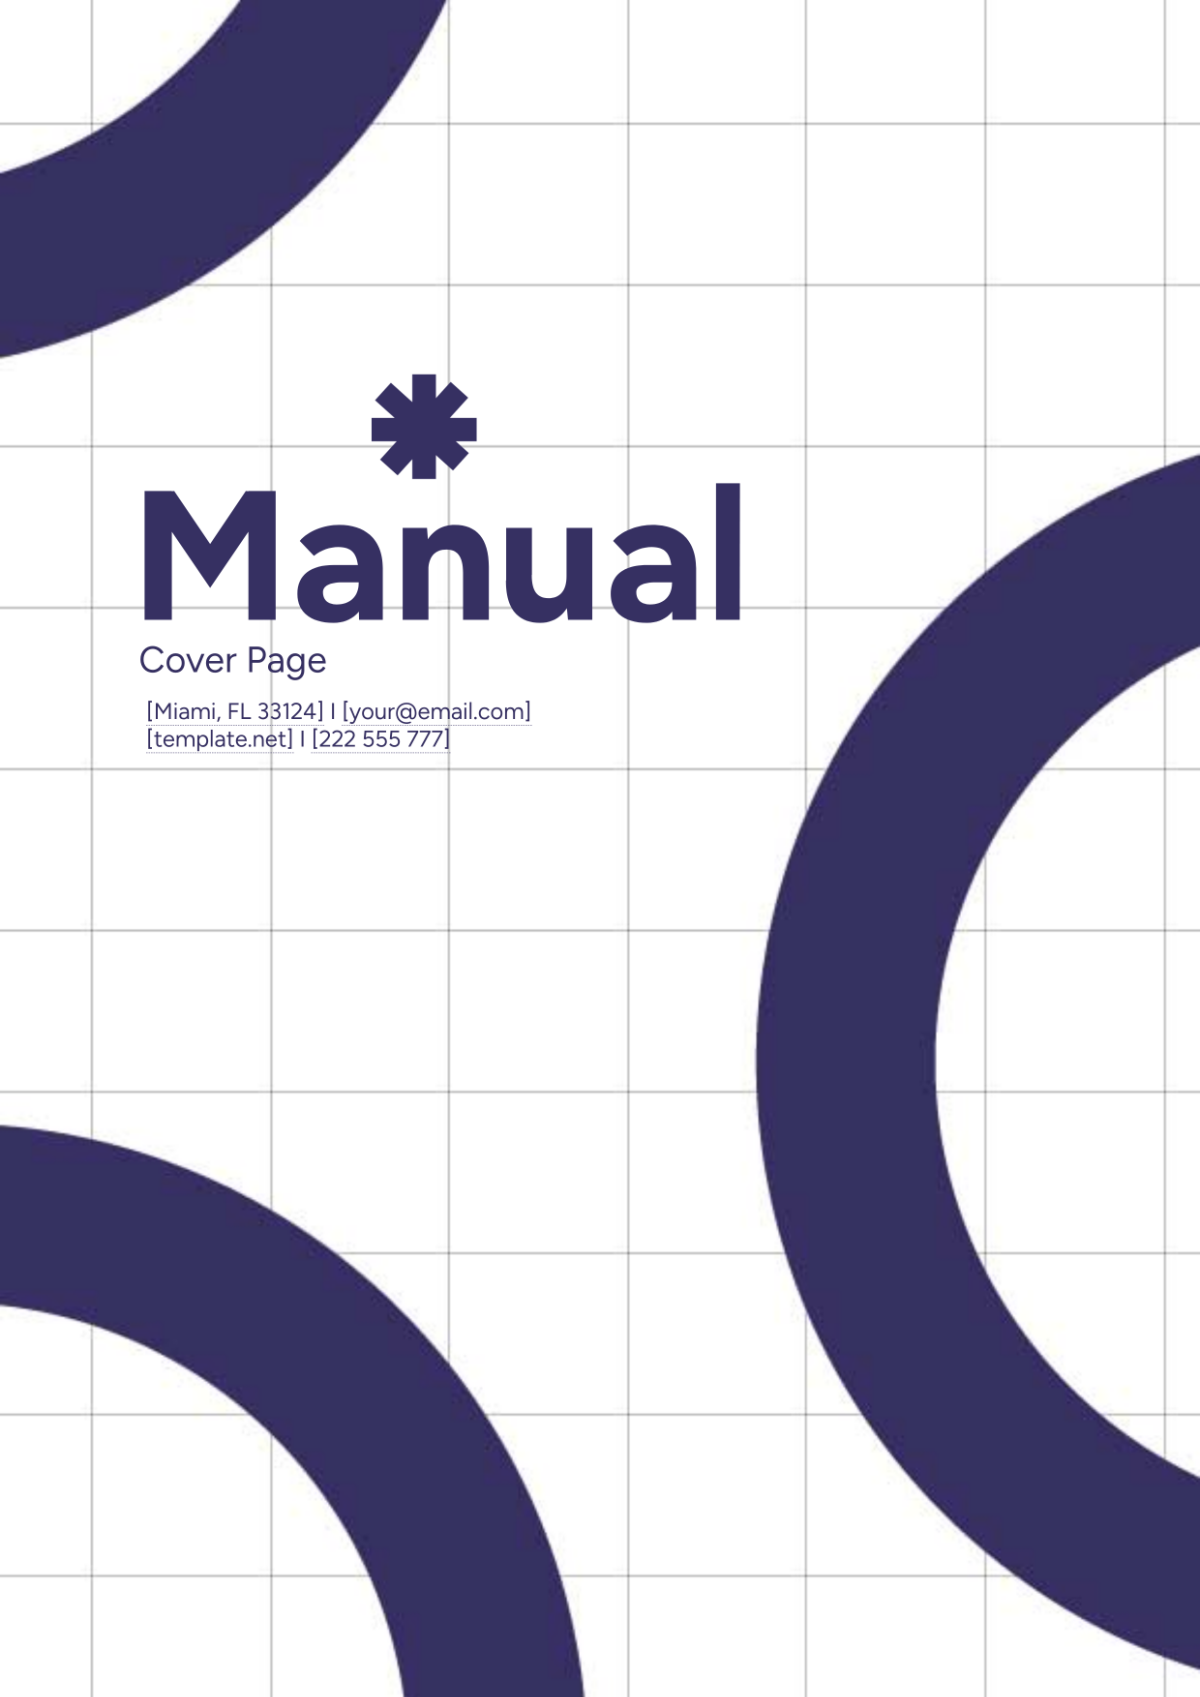 Manual Cover Page